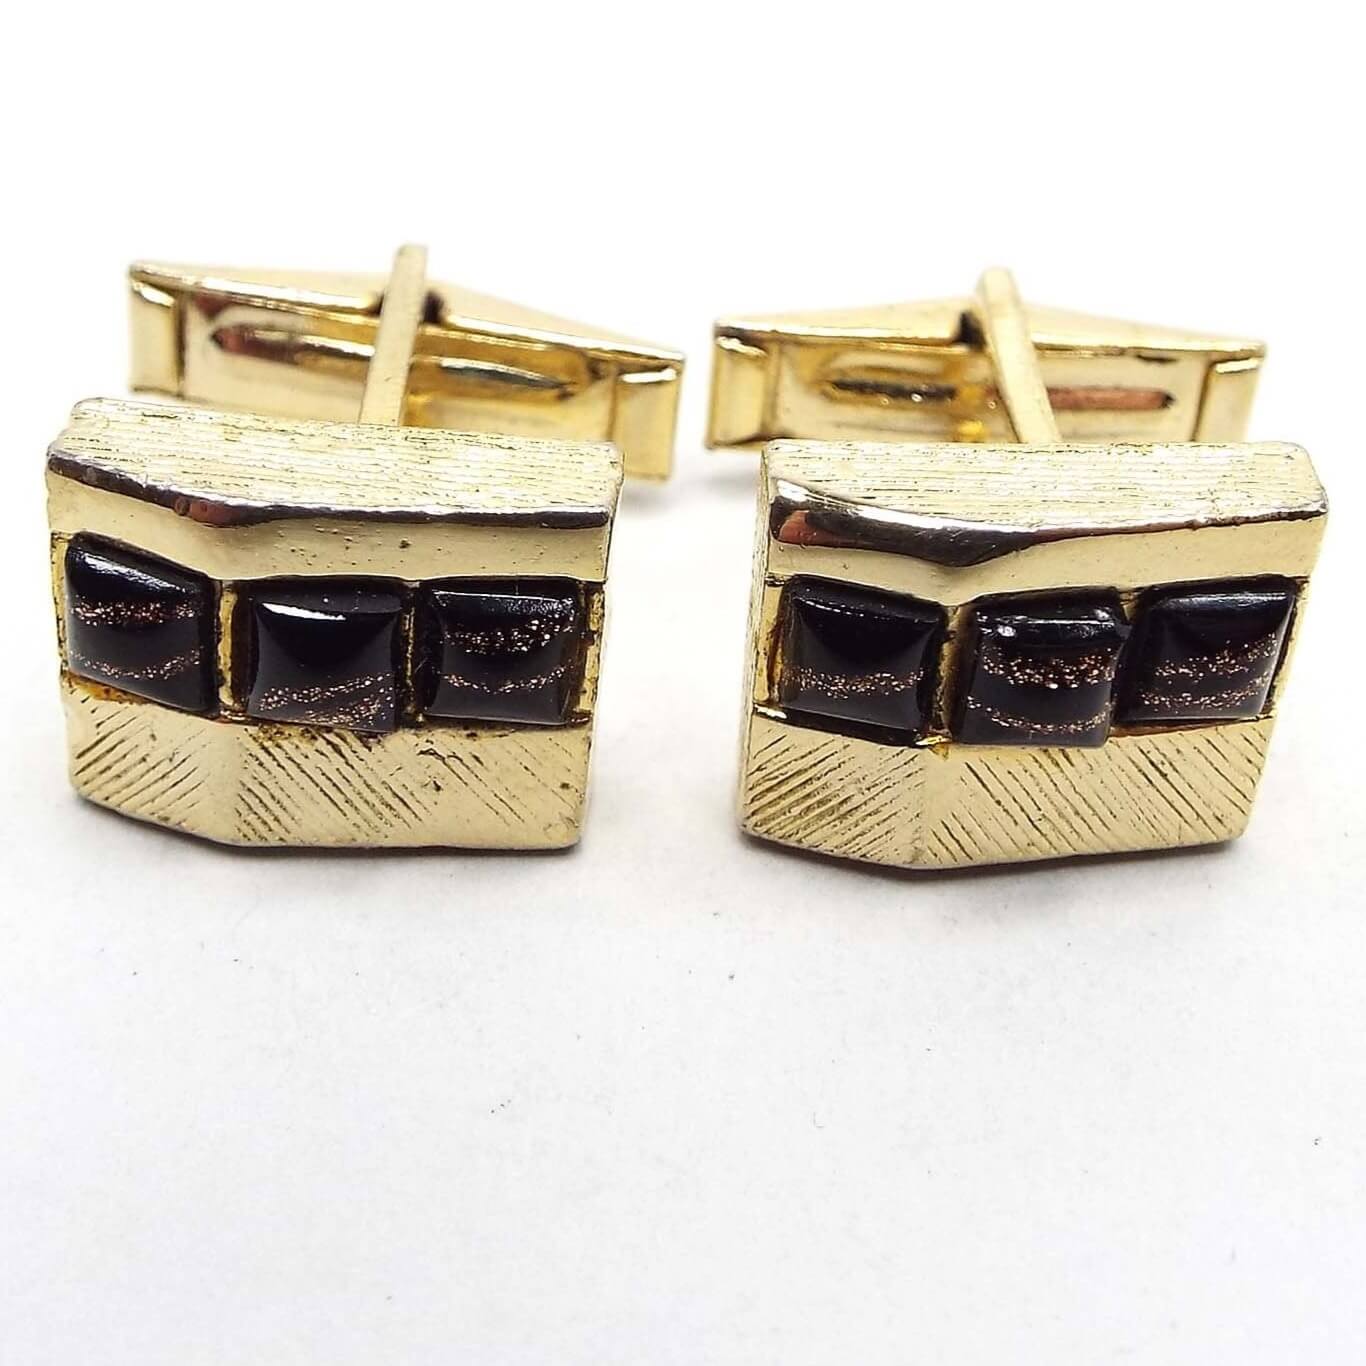 Front view of the retro vintage cufflinks with fancy glass cabs. The cufflinks are gold tone in color and are square with an angle on the front. There are three square glass cabs on each that are black with stripes of copper color glitter. No two cabs look the same. 